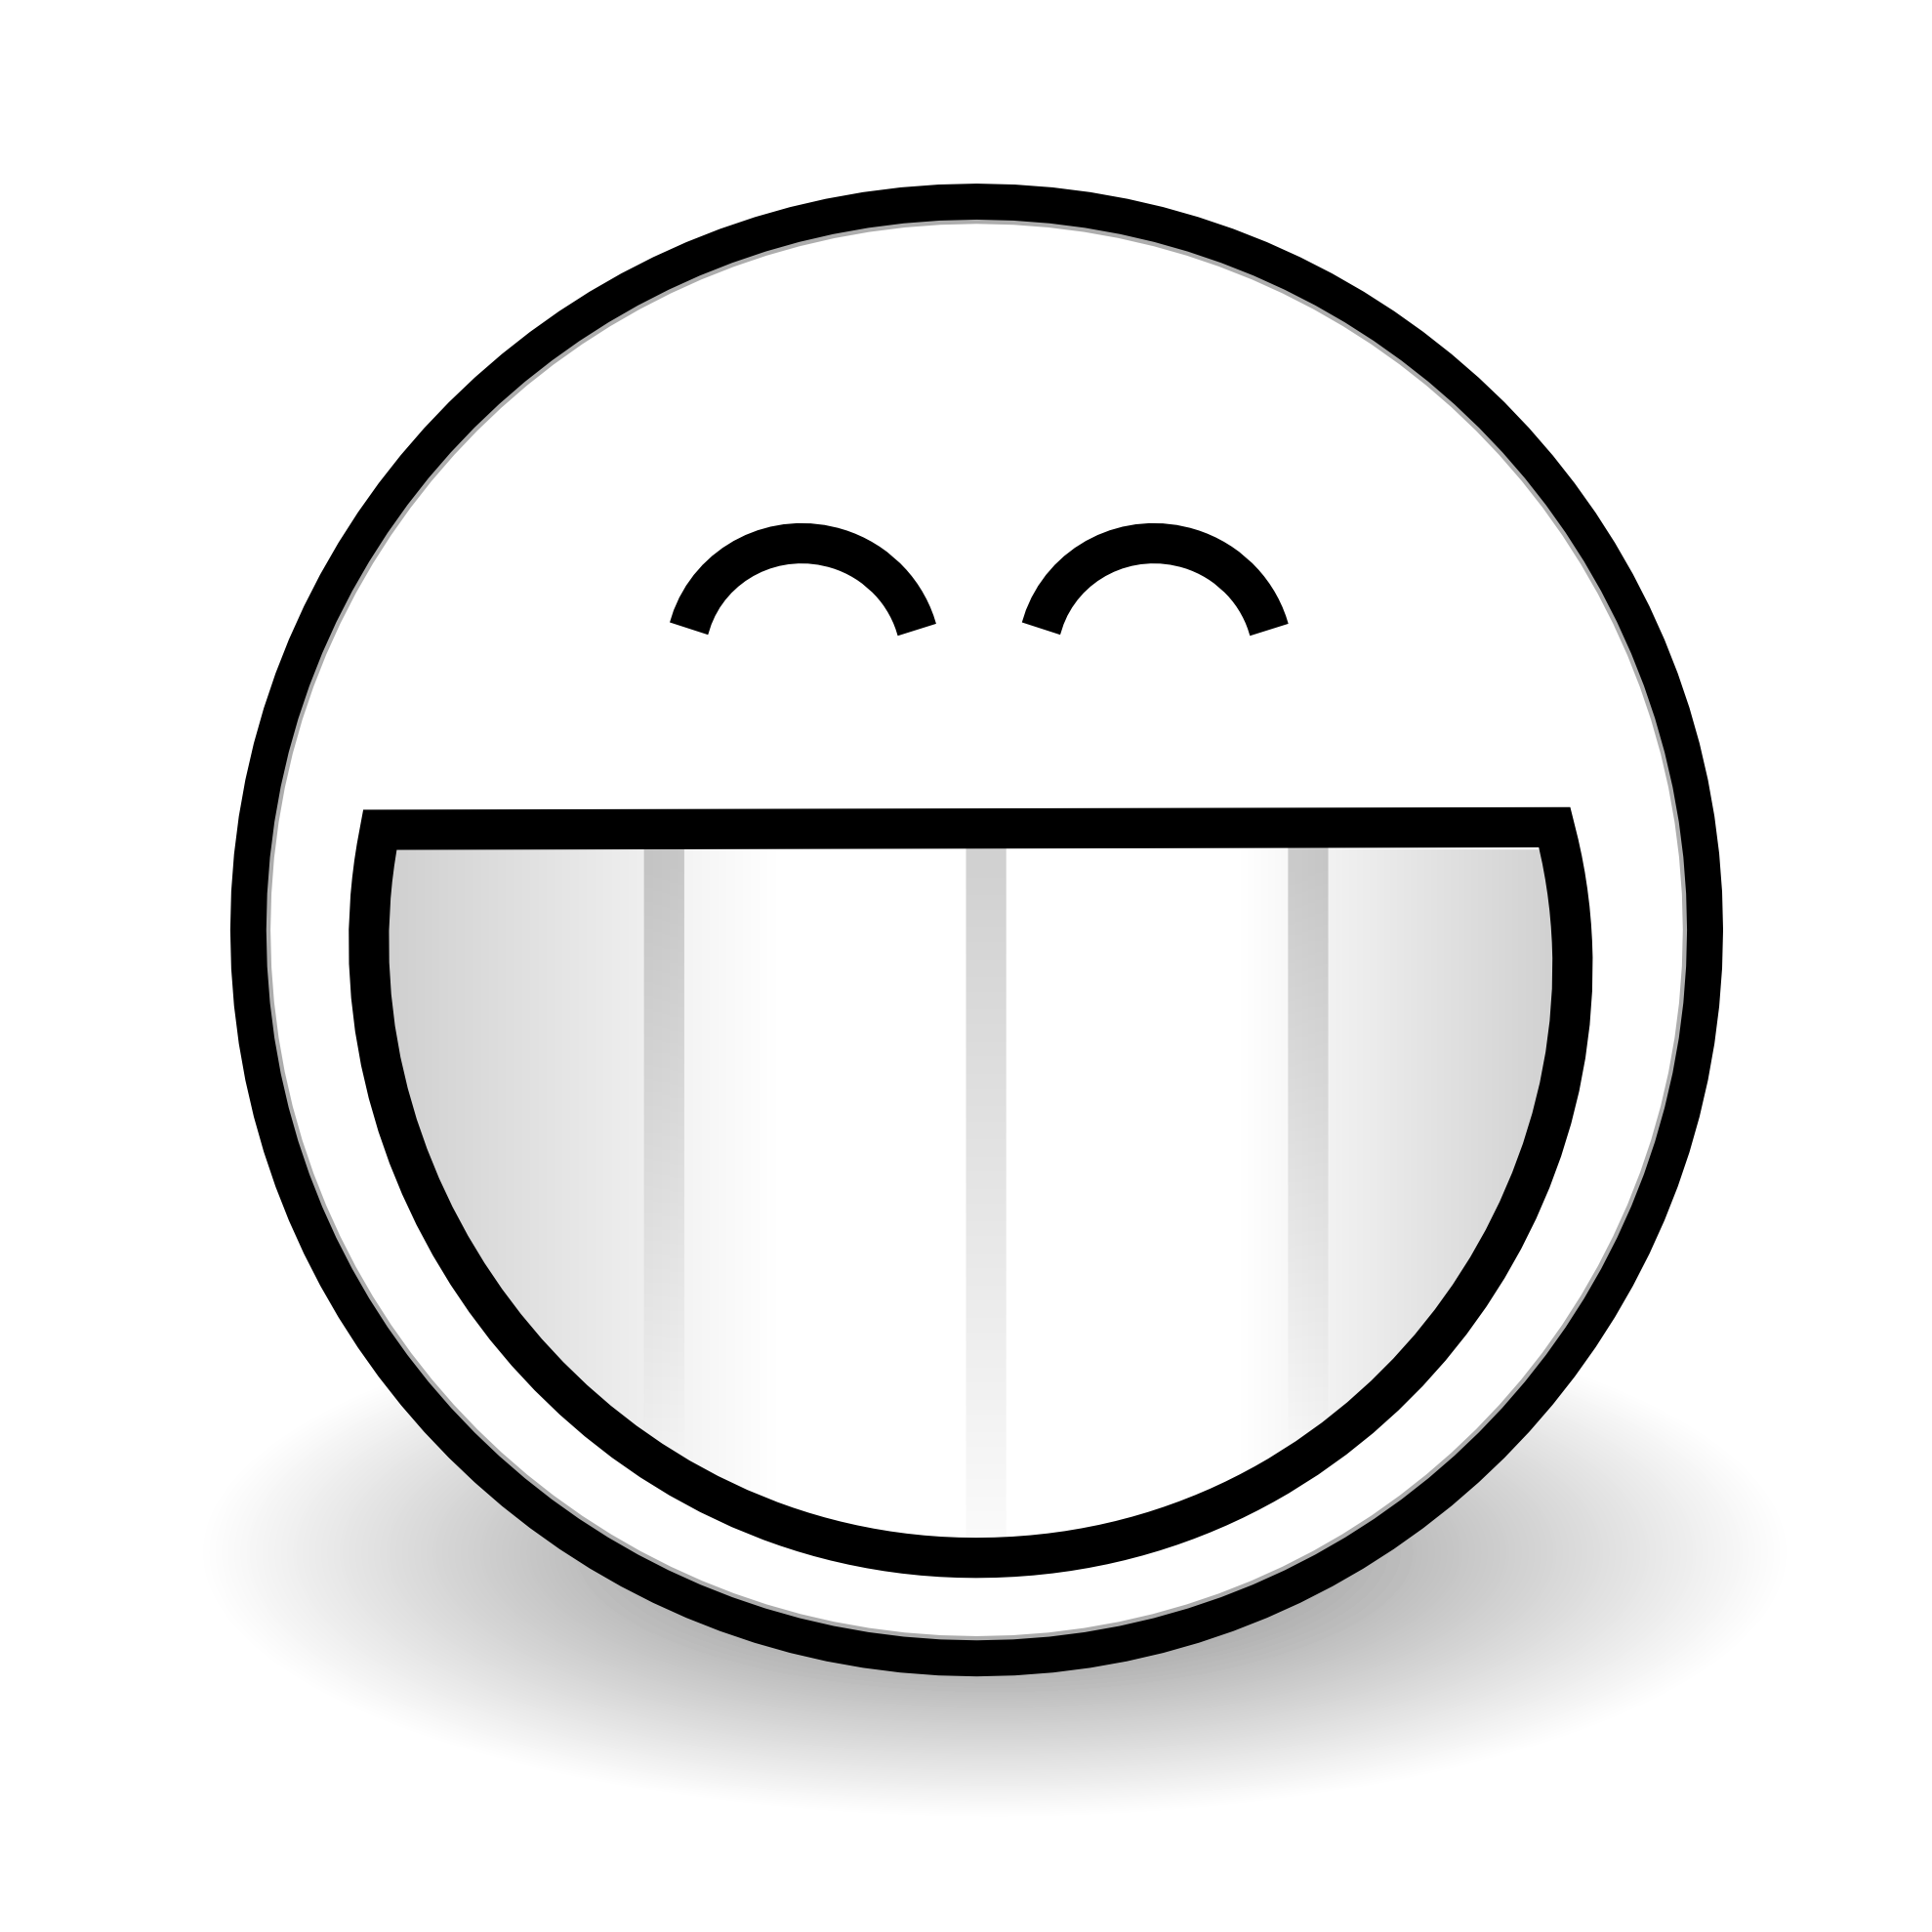 Smiley face  black and white clipart free happy faces black and white